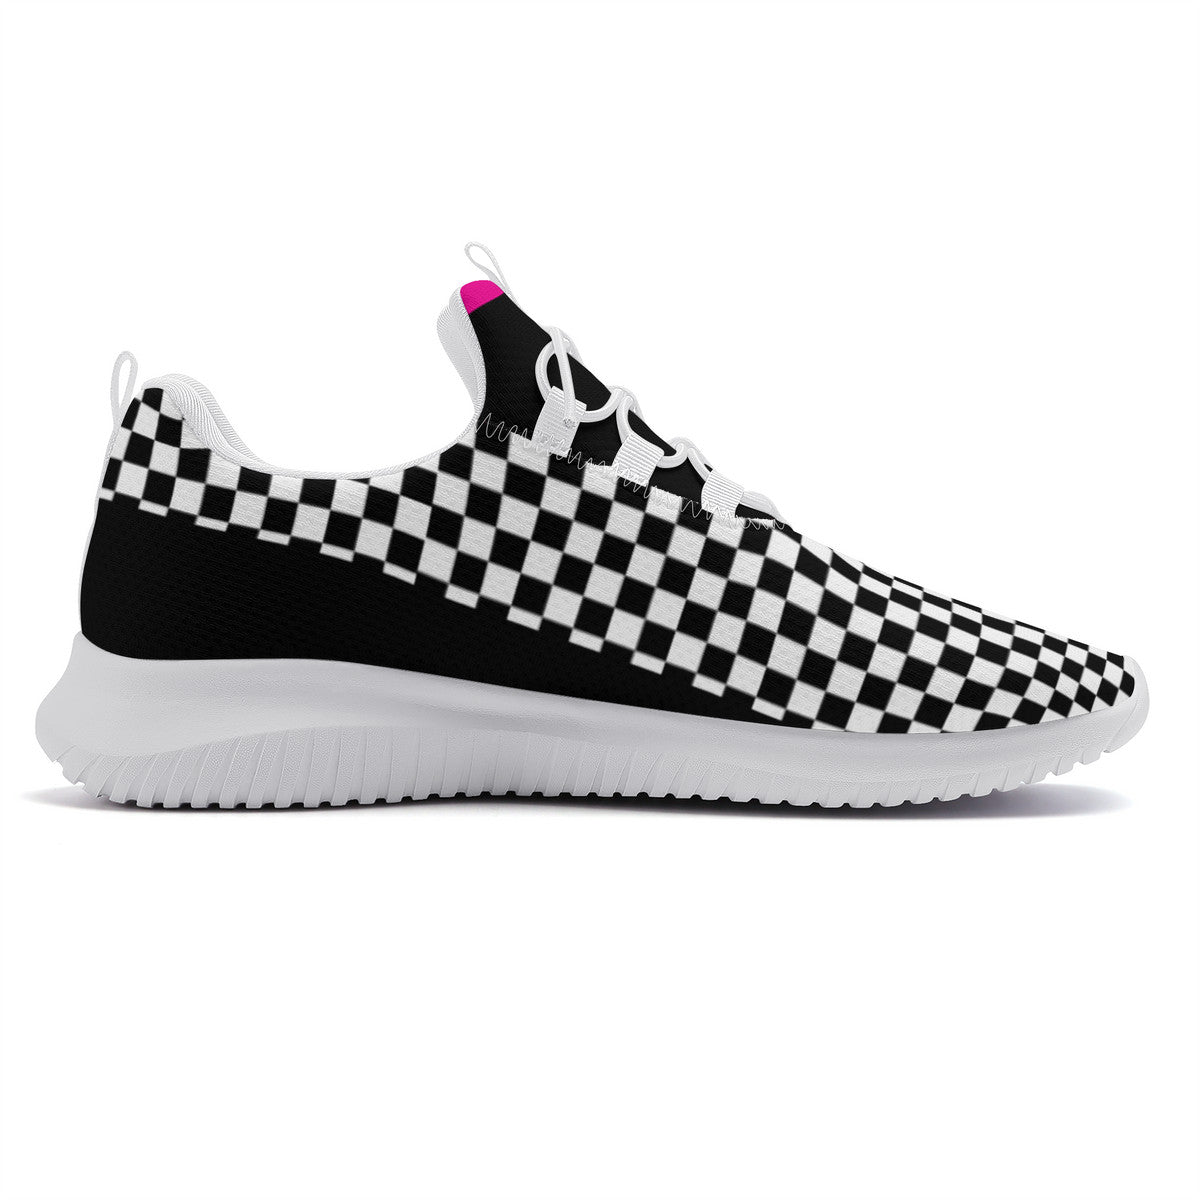 Dance sneakers- Checkered -Black and White